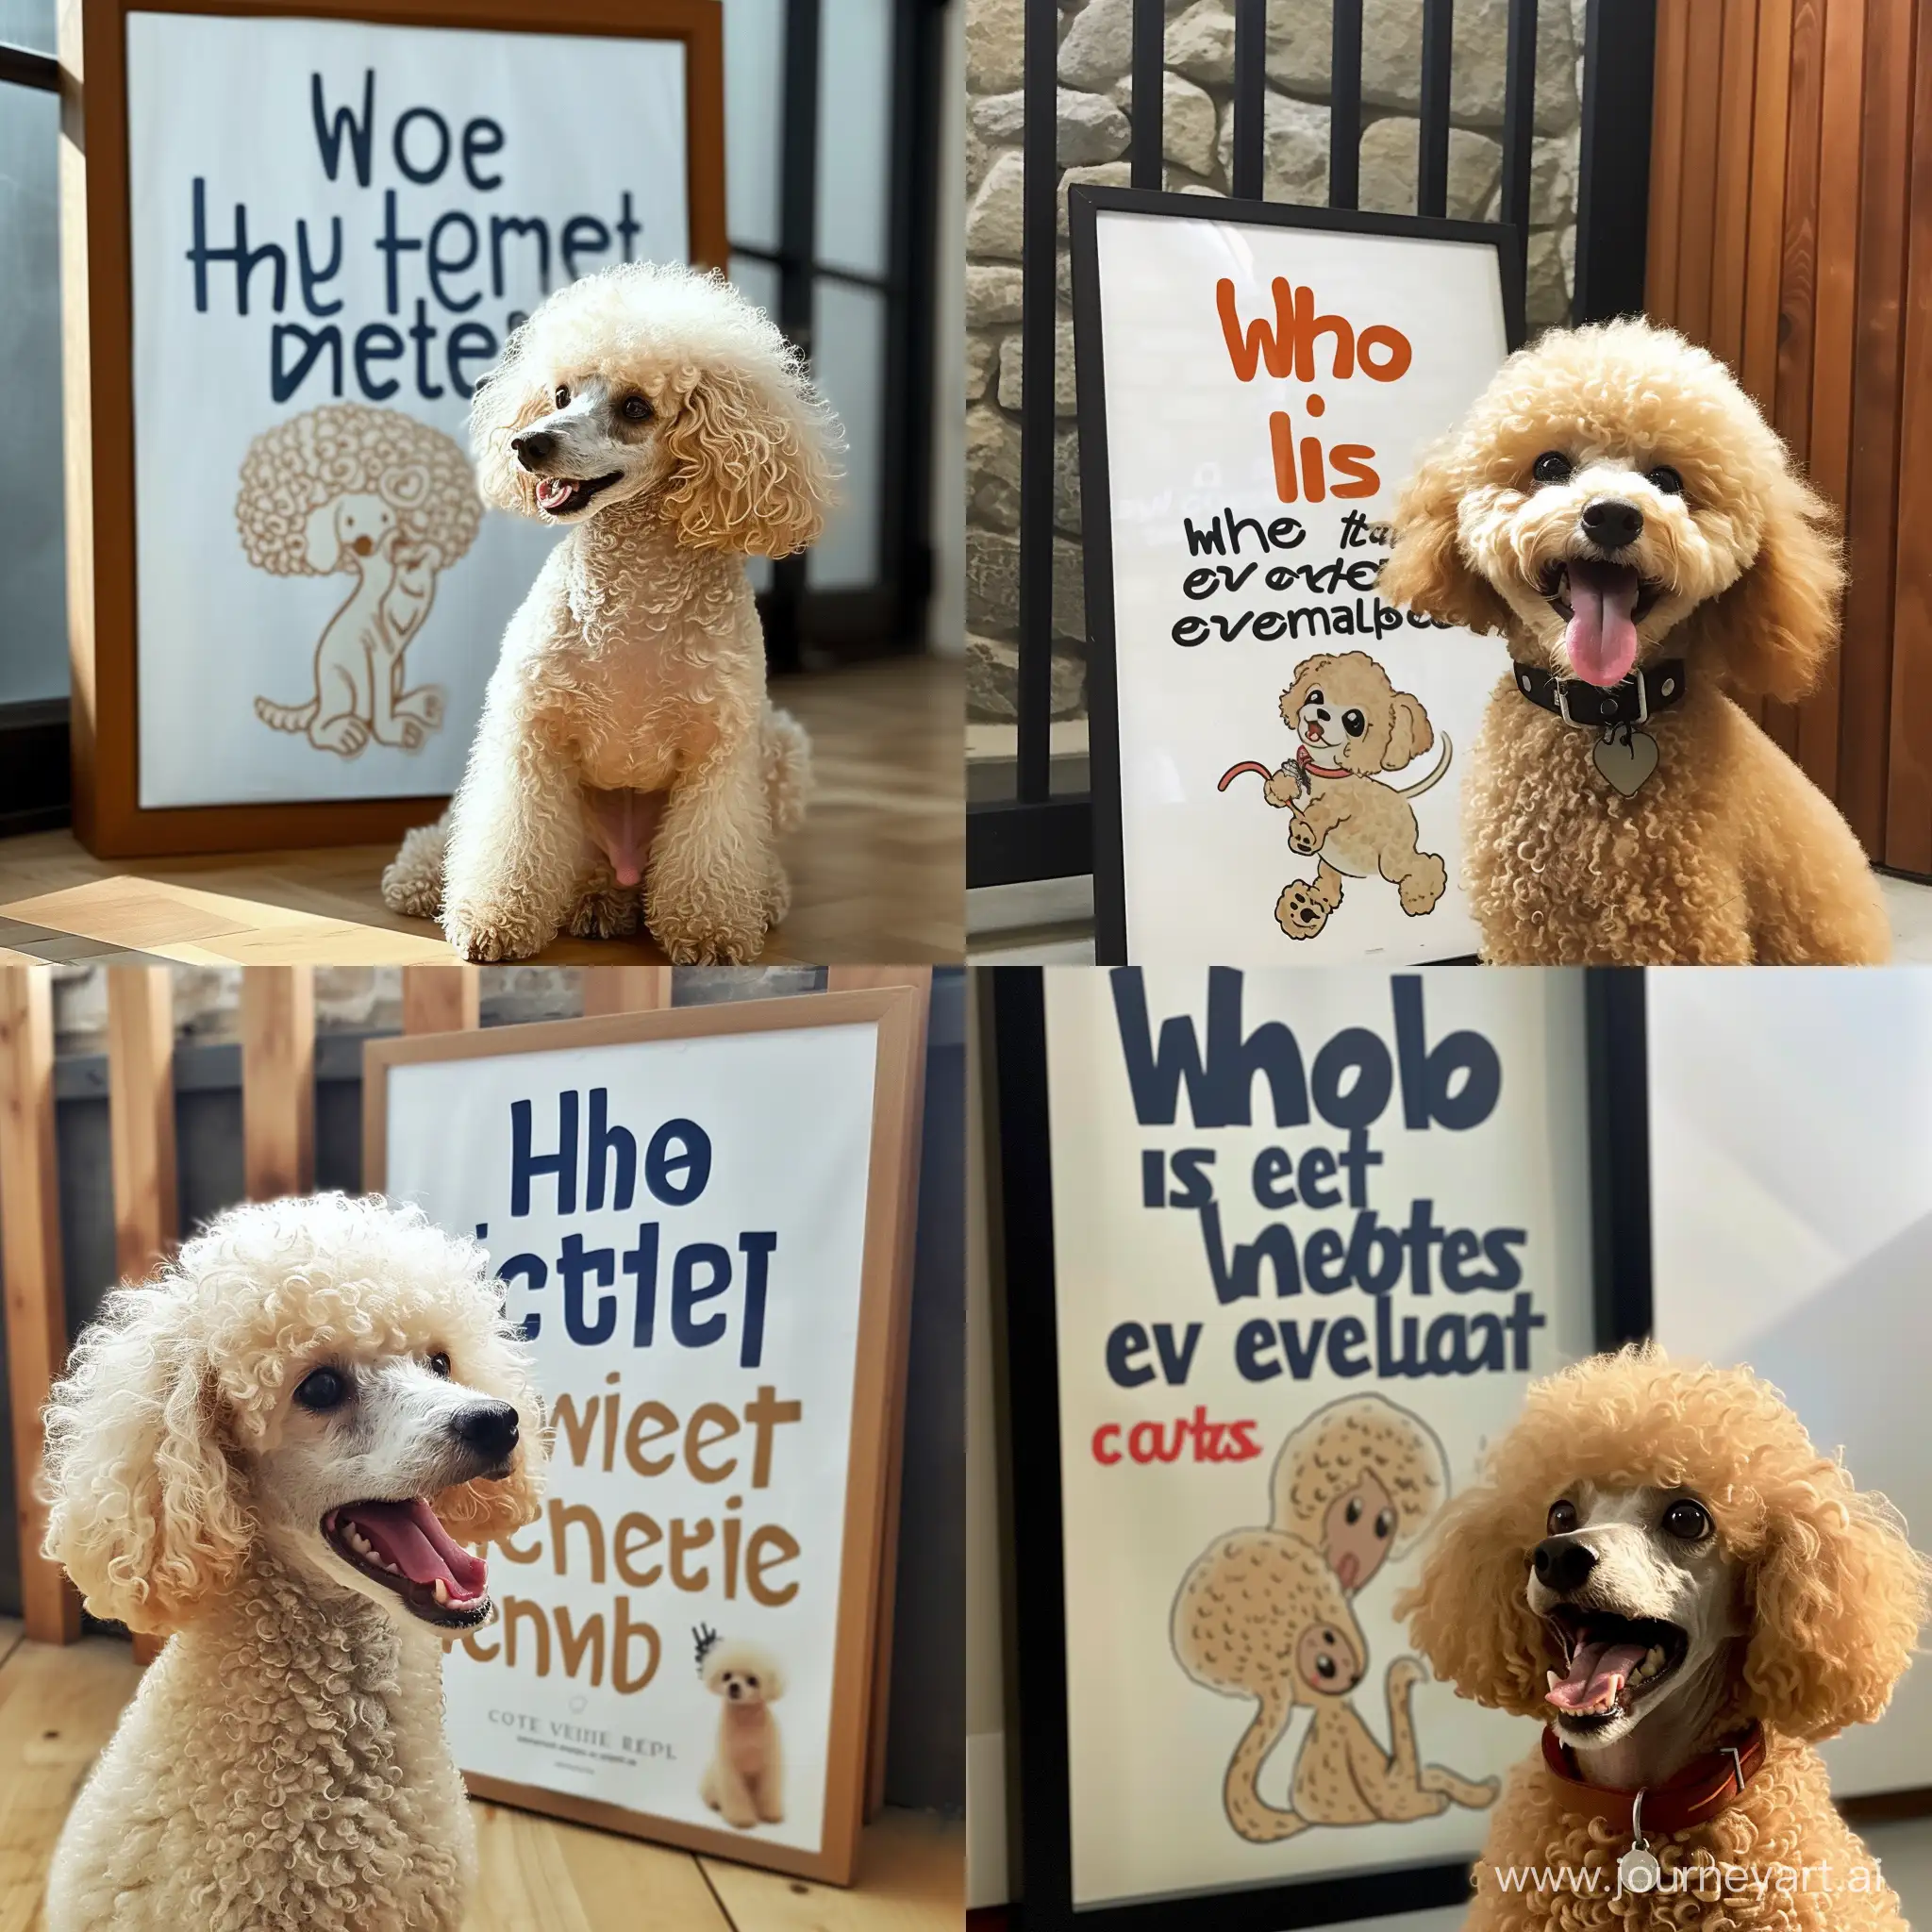 A photo of a cute poodle in front of a poster that reads "Who is the cutest creature ever existed?"